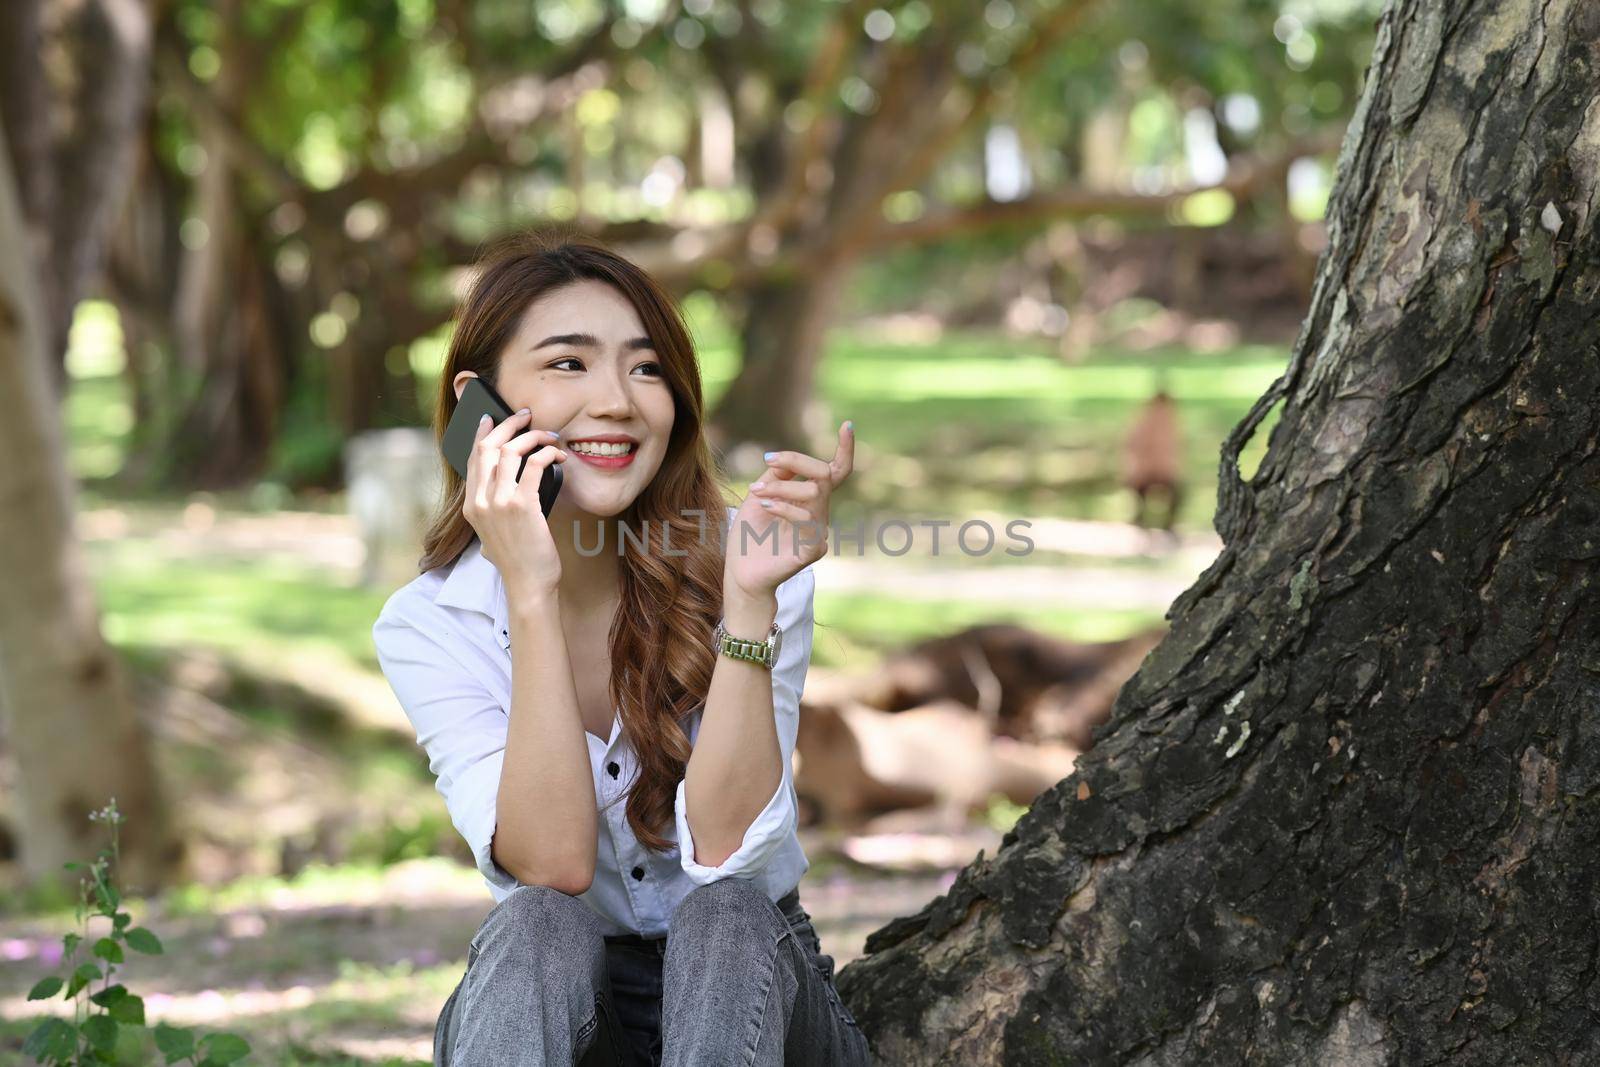 Smiling woman siting in public park and talking on mobile phone. by prathanchorruangsak